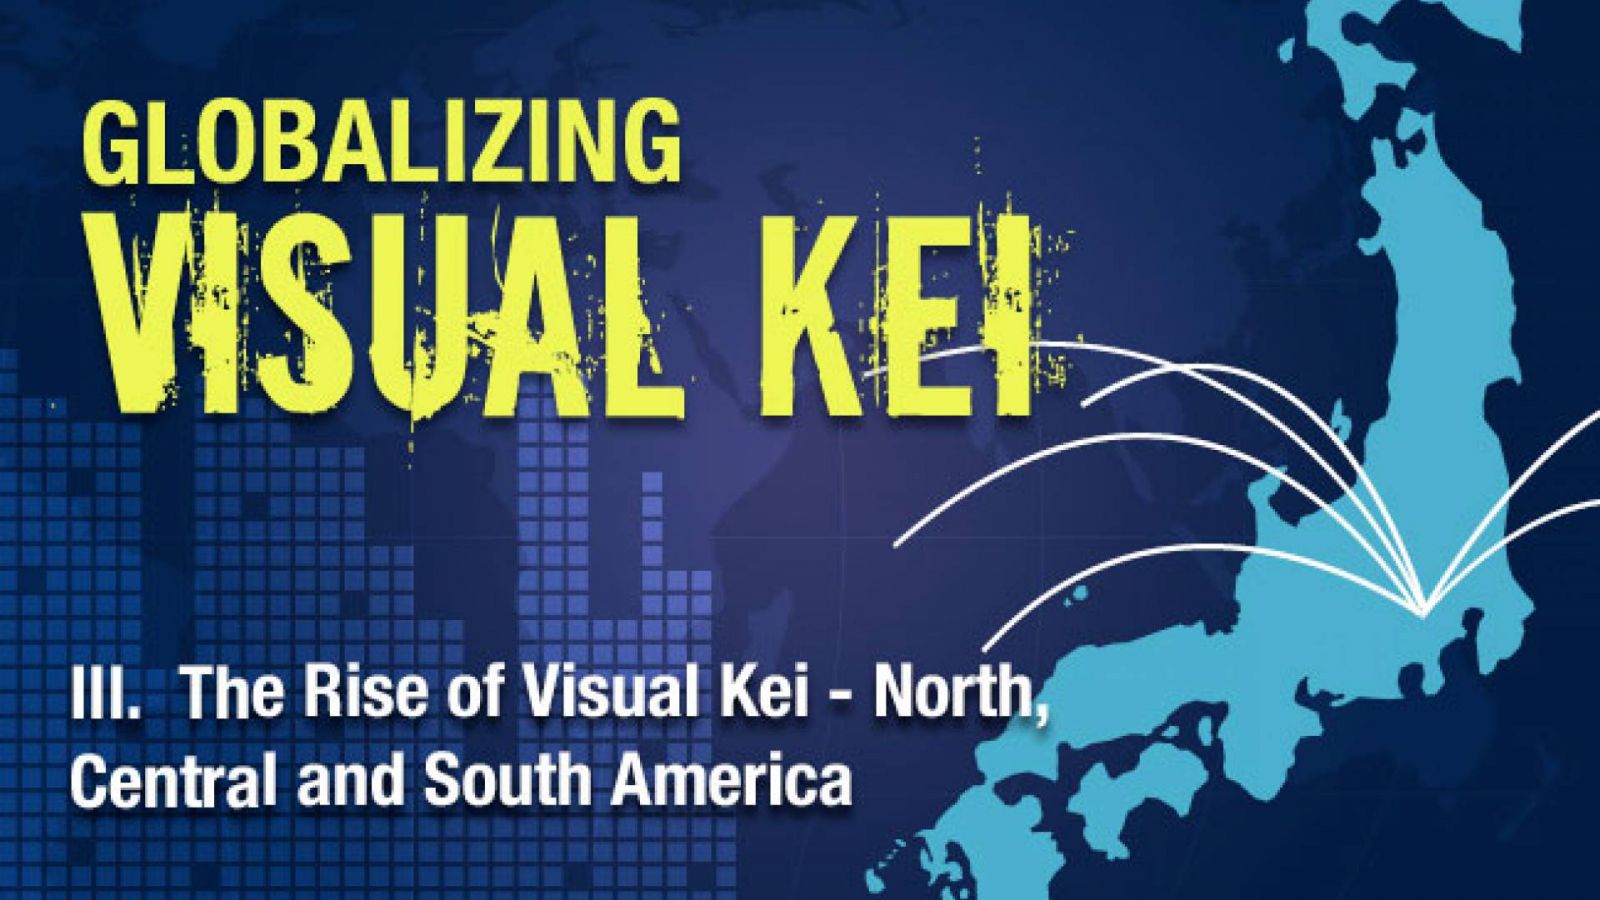 Globalizing Visual Kei: The Rise of Visual Kei - North, Central and South America © Lydia Michalitsianos